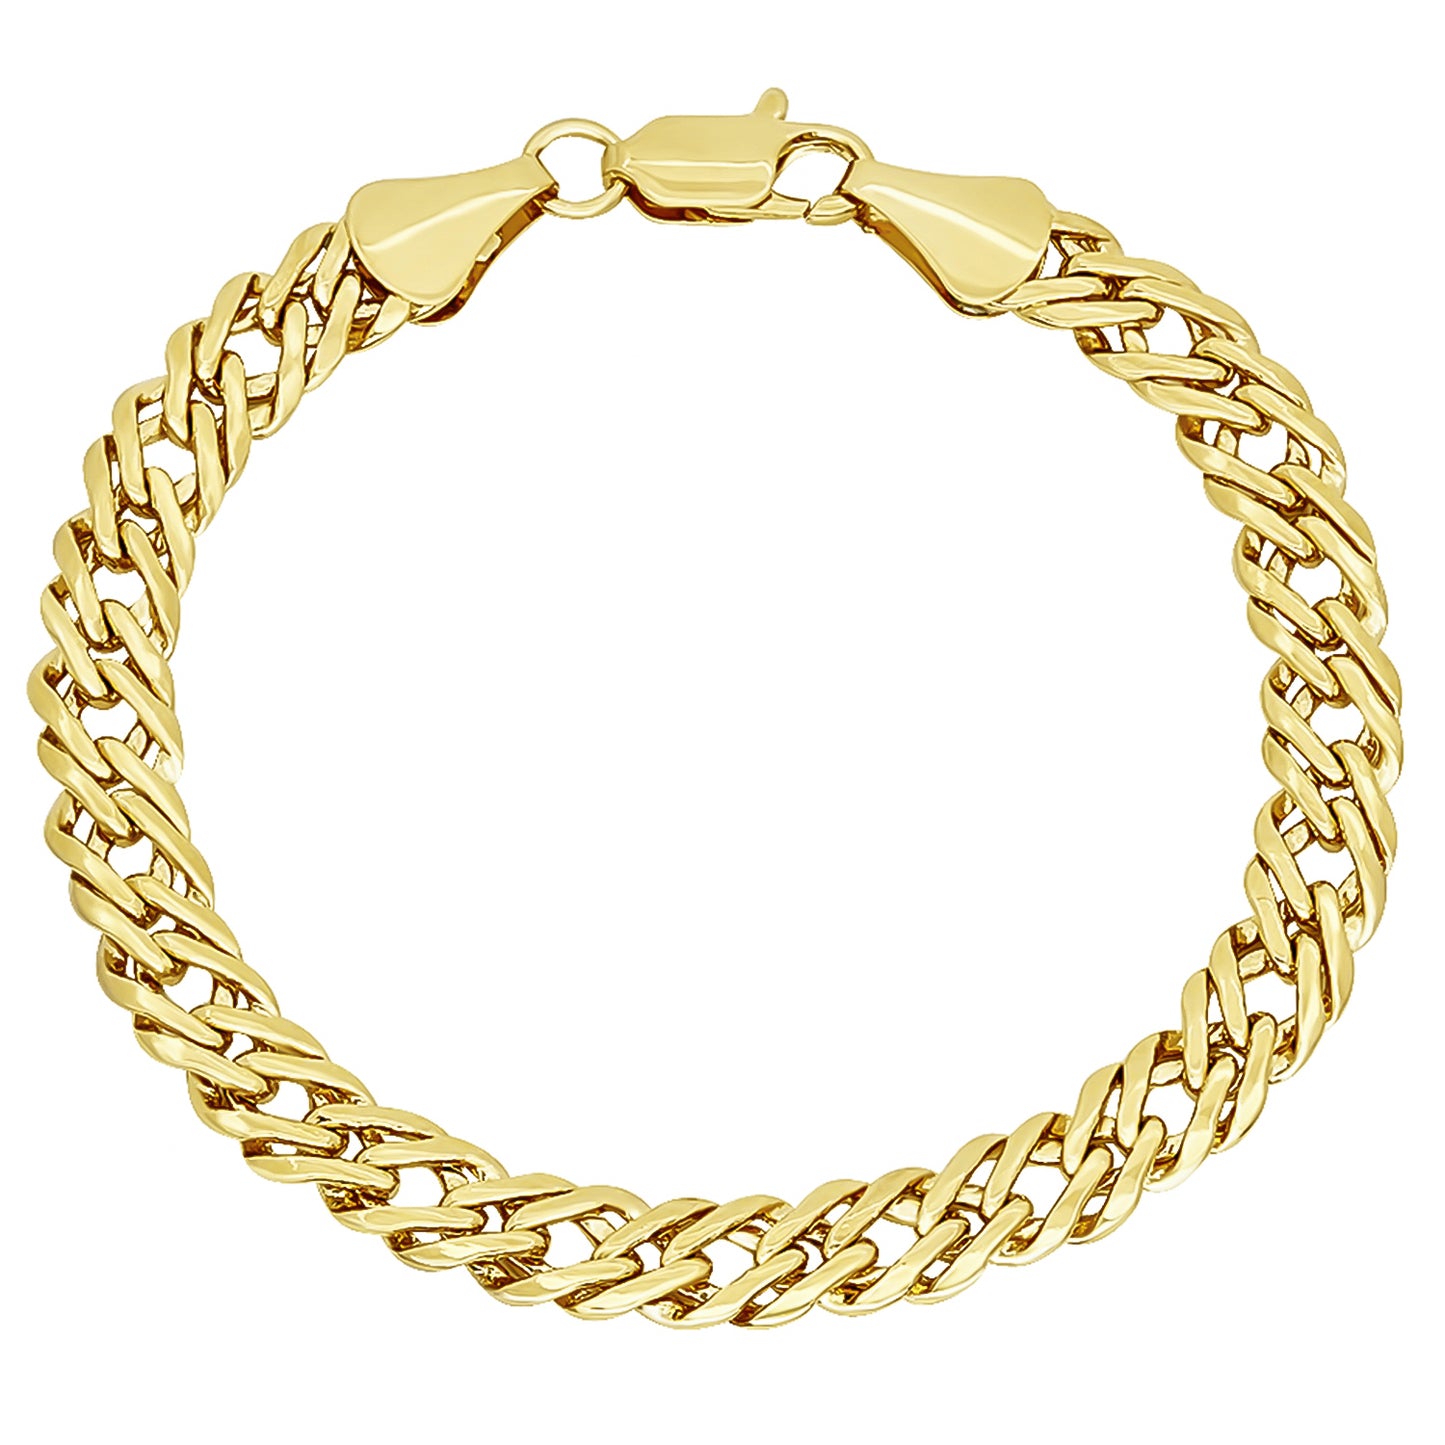 7.4mm 14k Yellow Gold Plated Cable Venetian Chain Bracelet (SKU: GL-061BB)